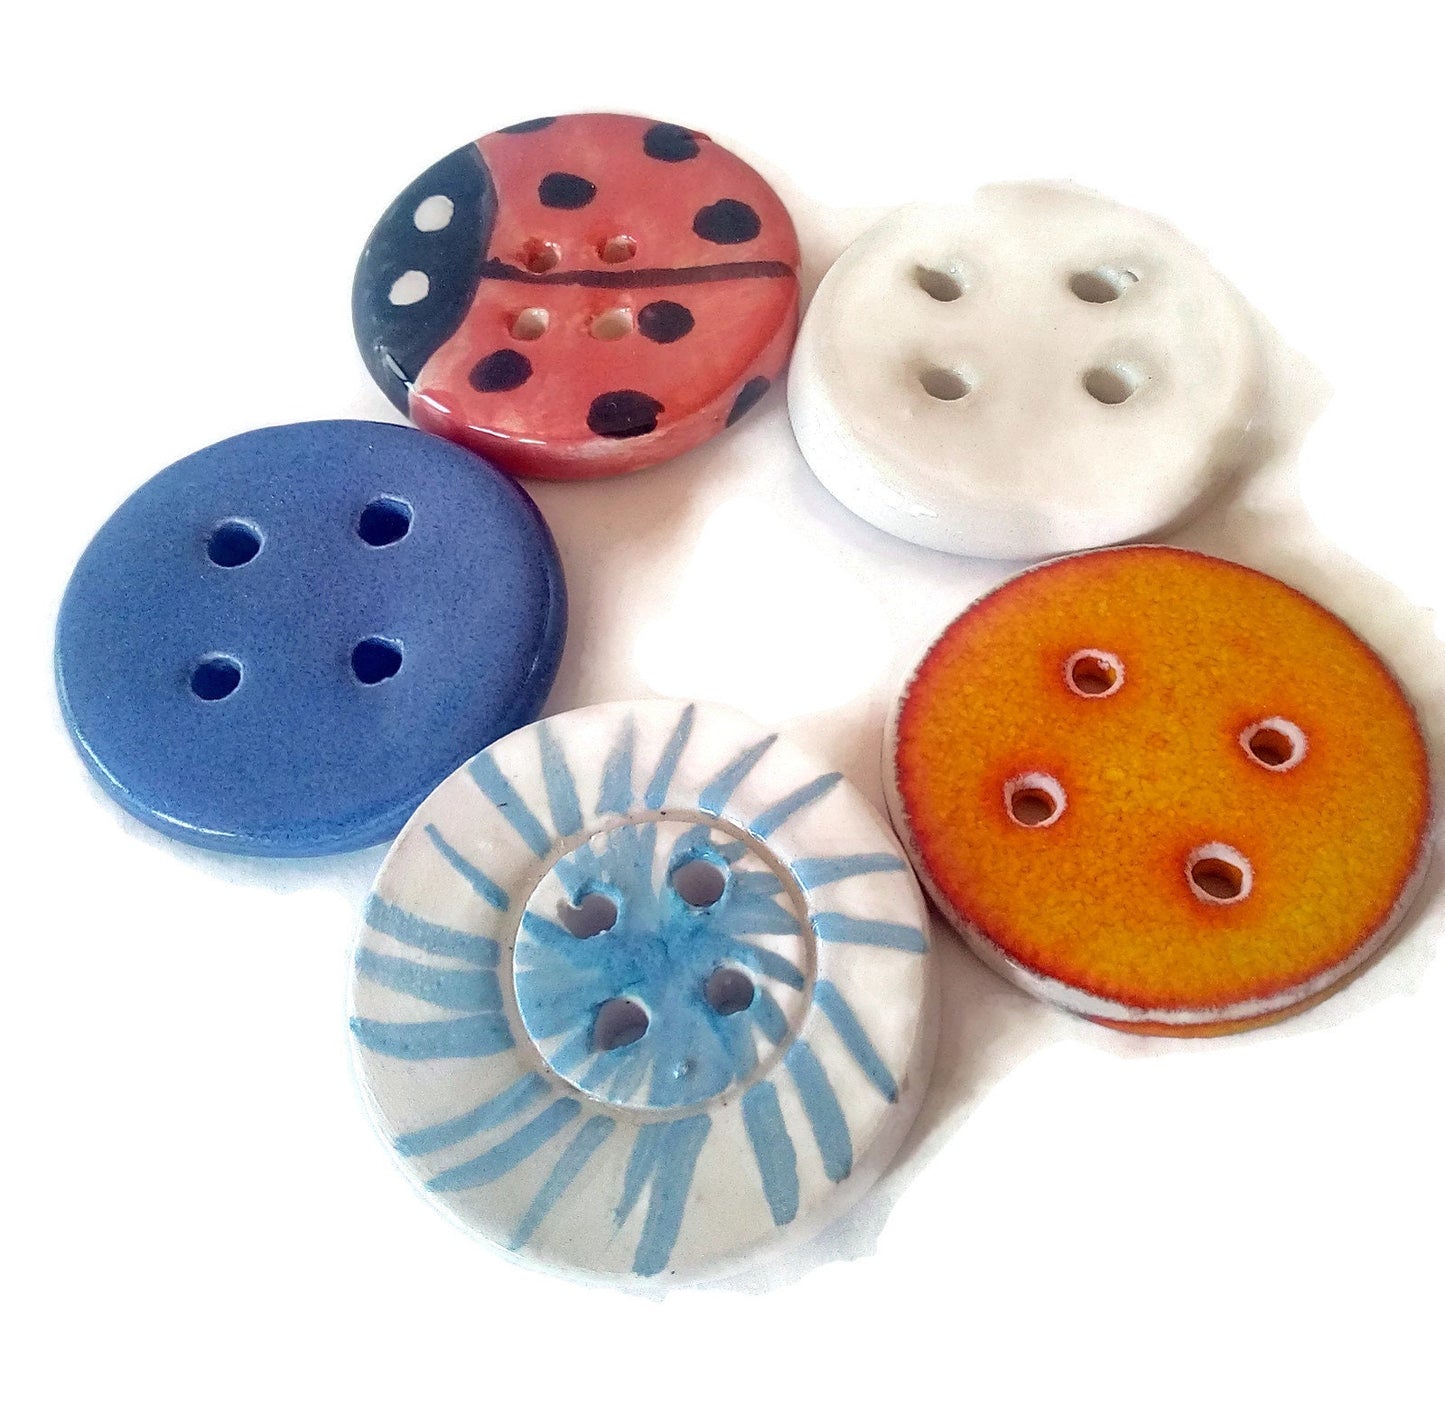 Sewing Buttons, Set Of 5 40mm Novelty Buttons For Crafts, Custom Buttons, Handmade Ceramics Sewing Notions - Ceramica Ana Rafael